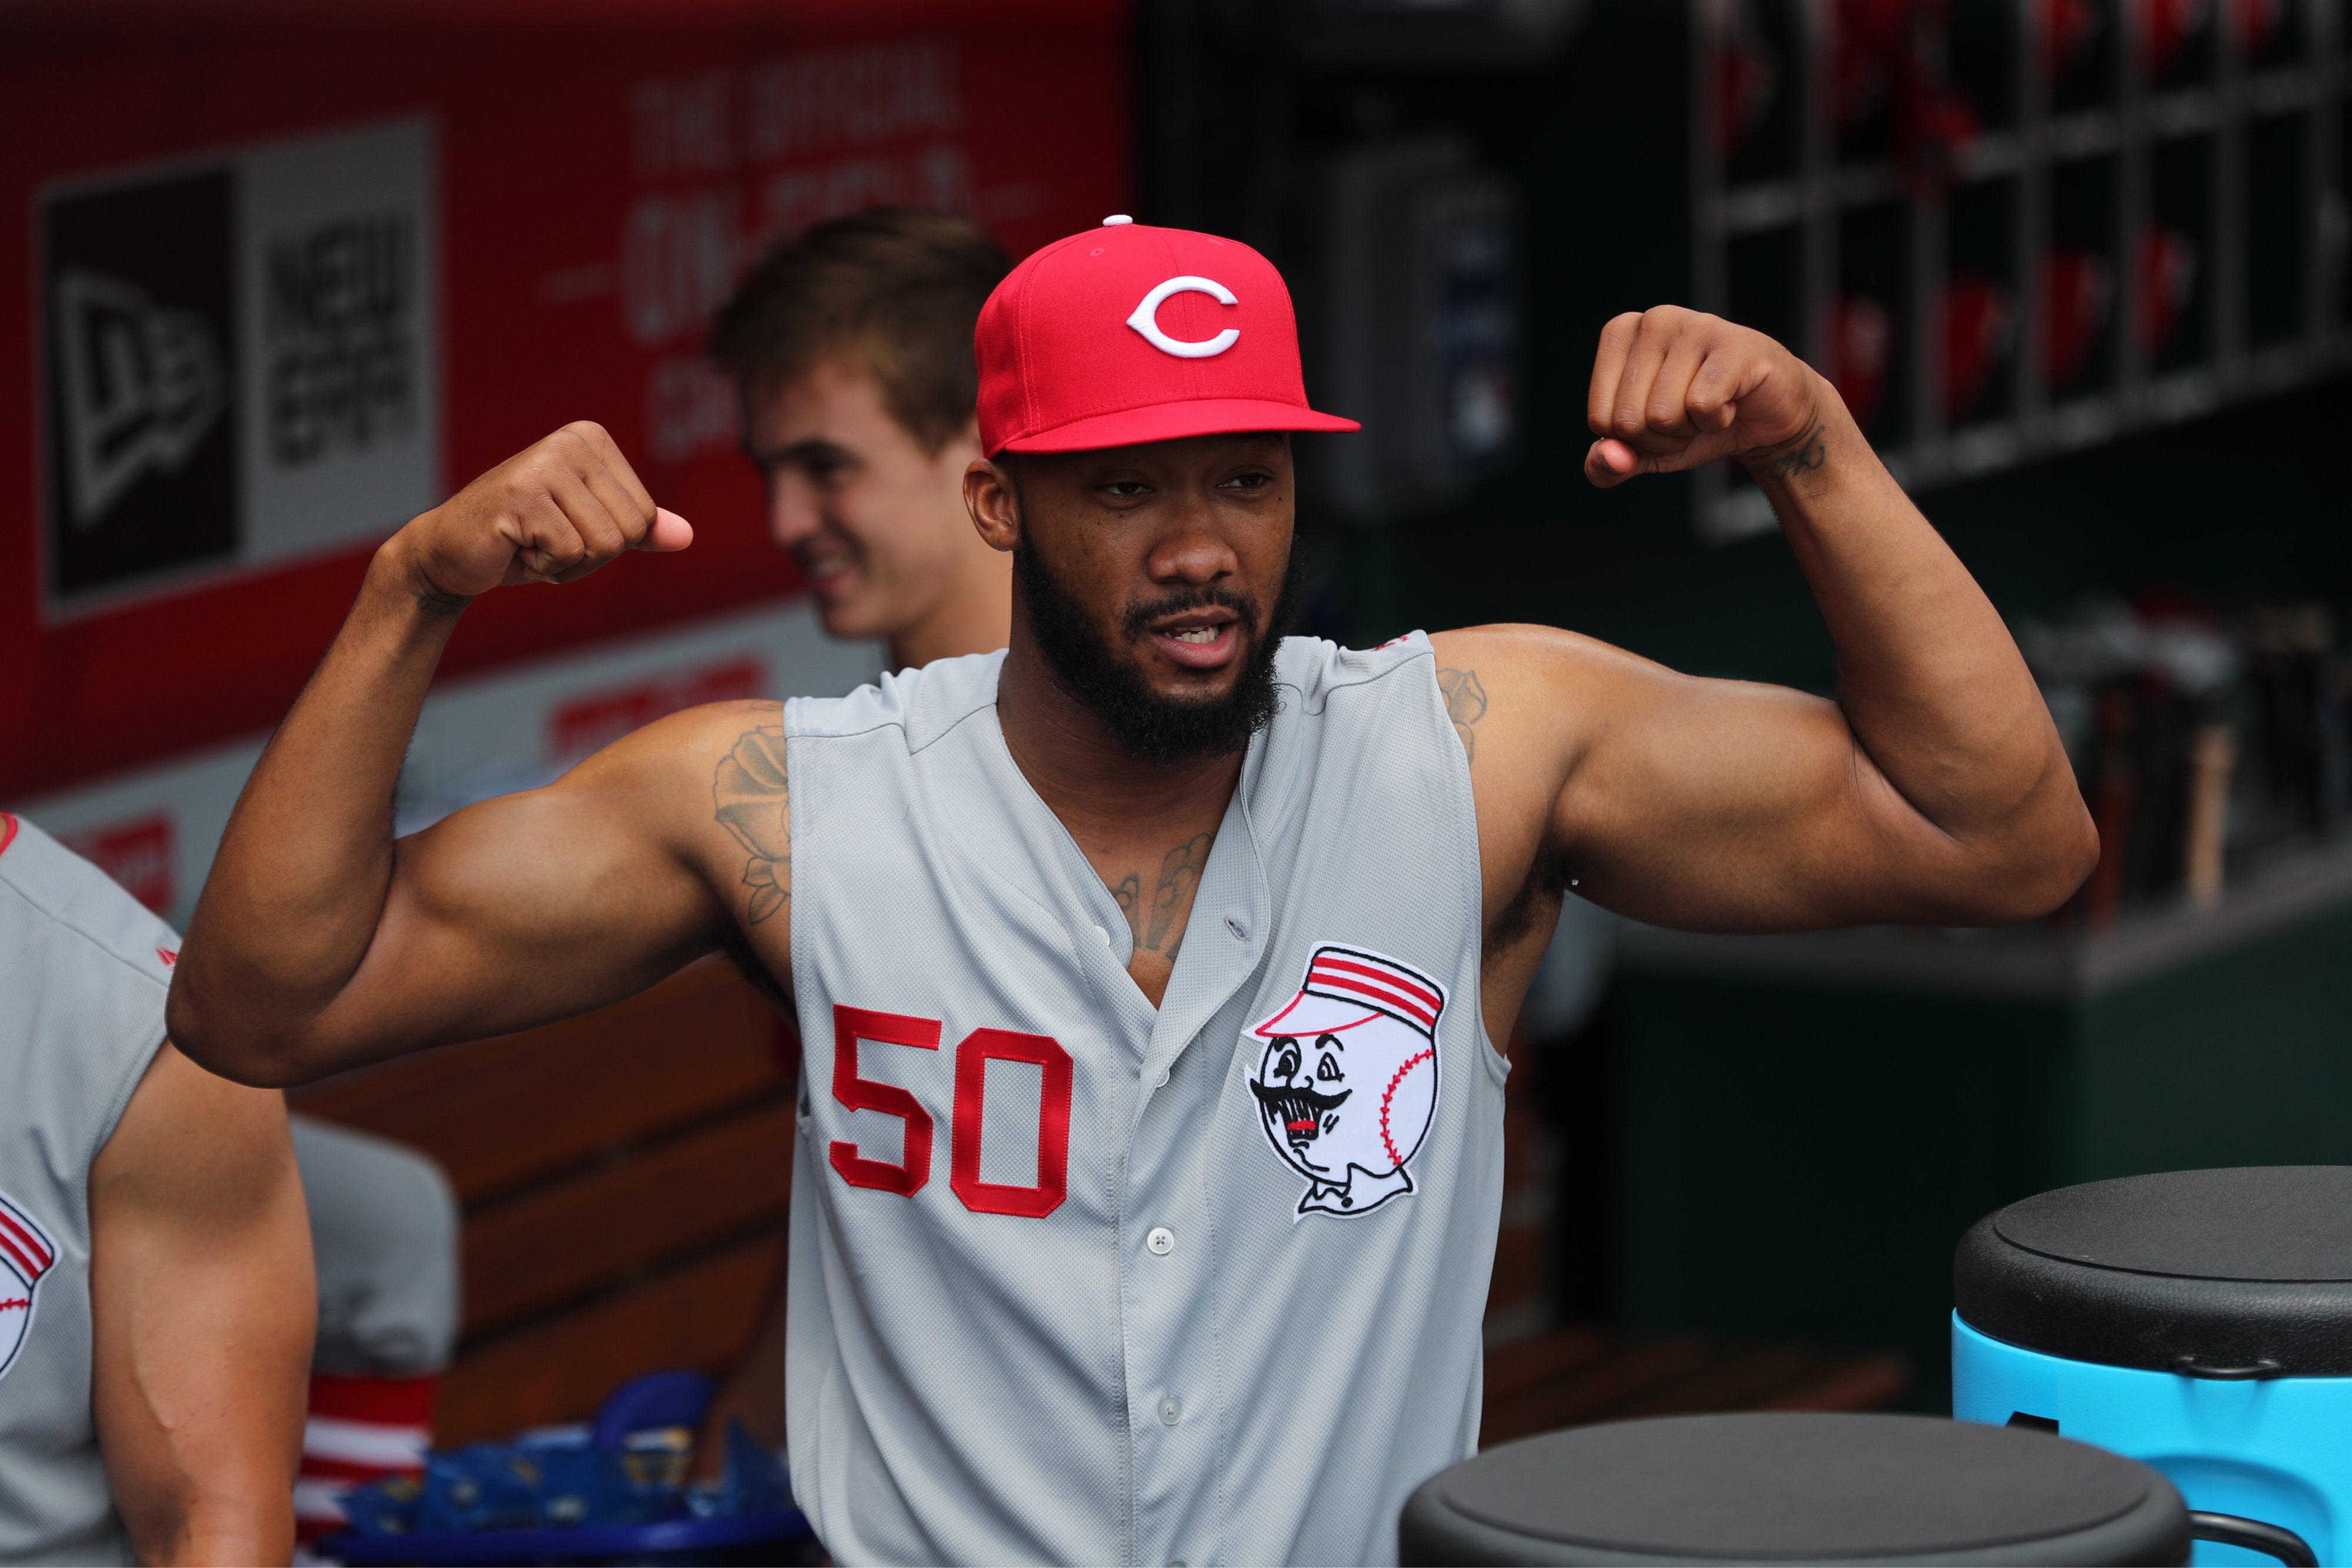 Cut4 on X: These Reds vest throwbacks are a LOOK.